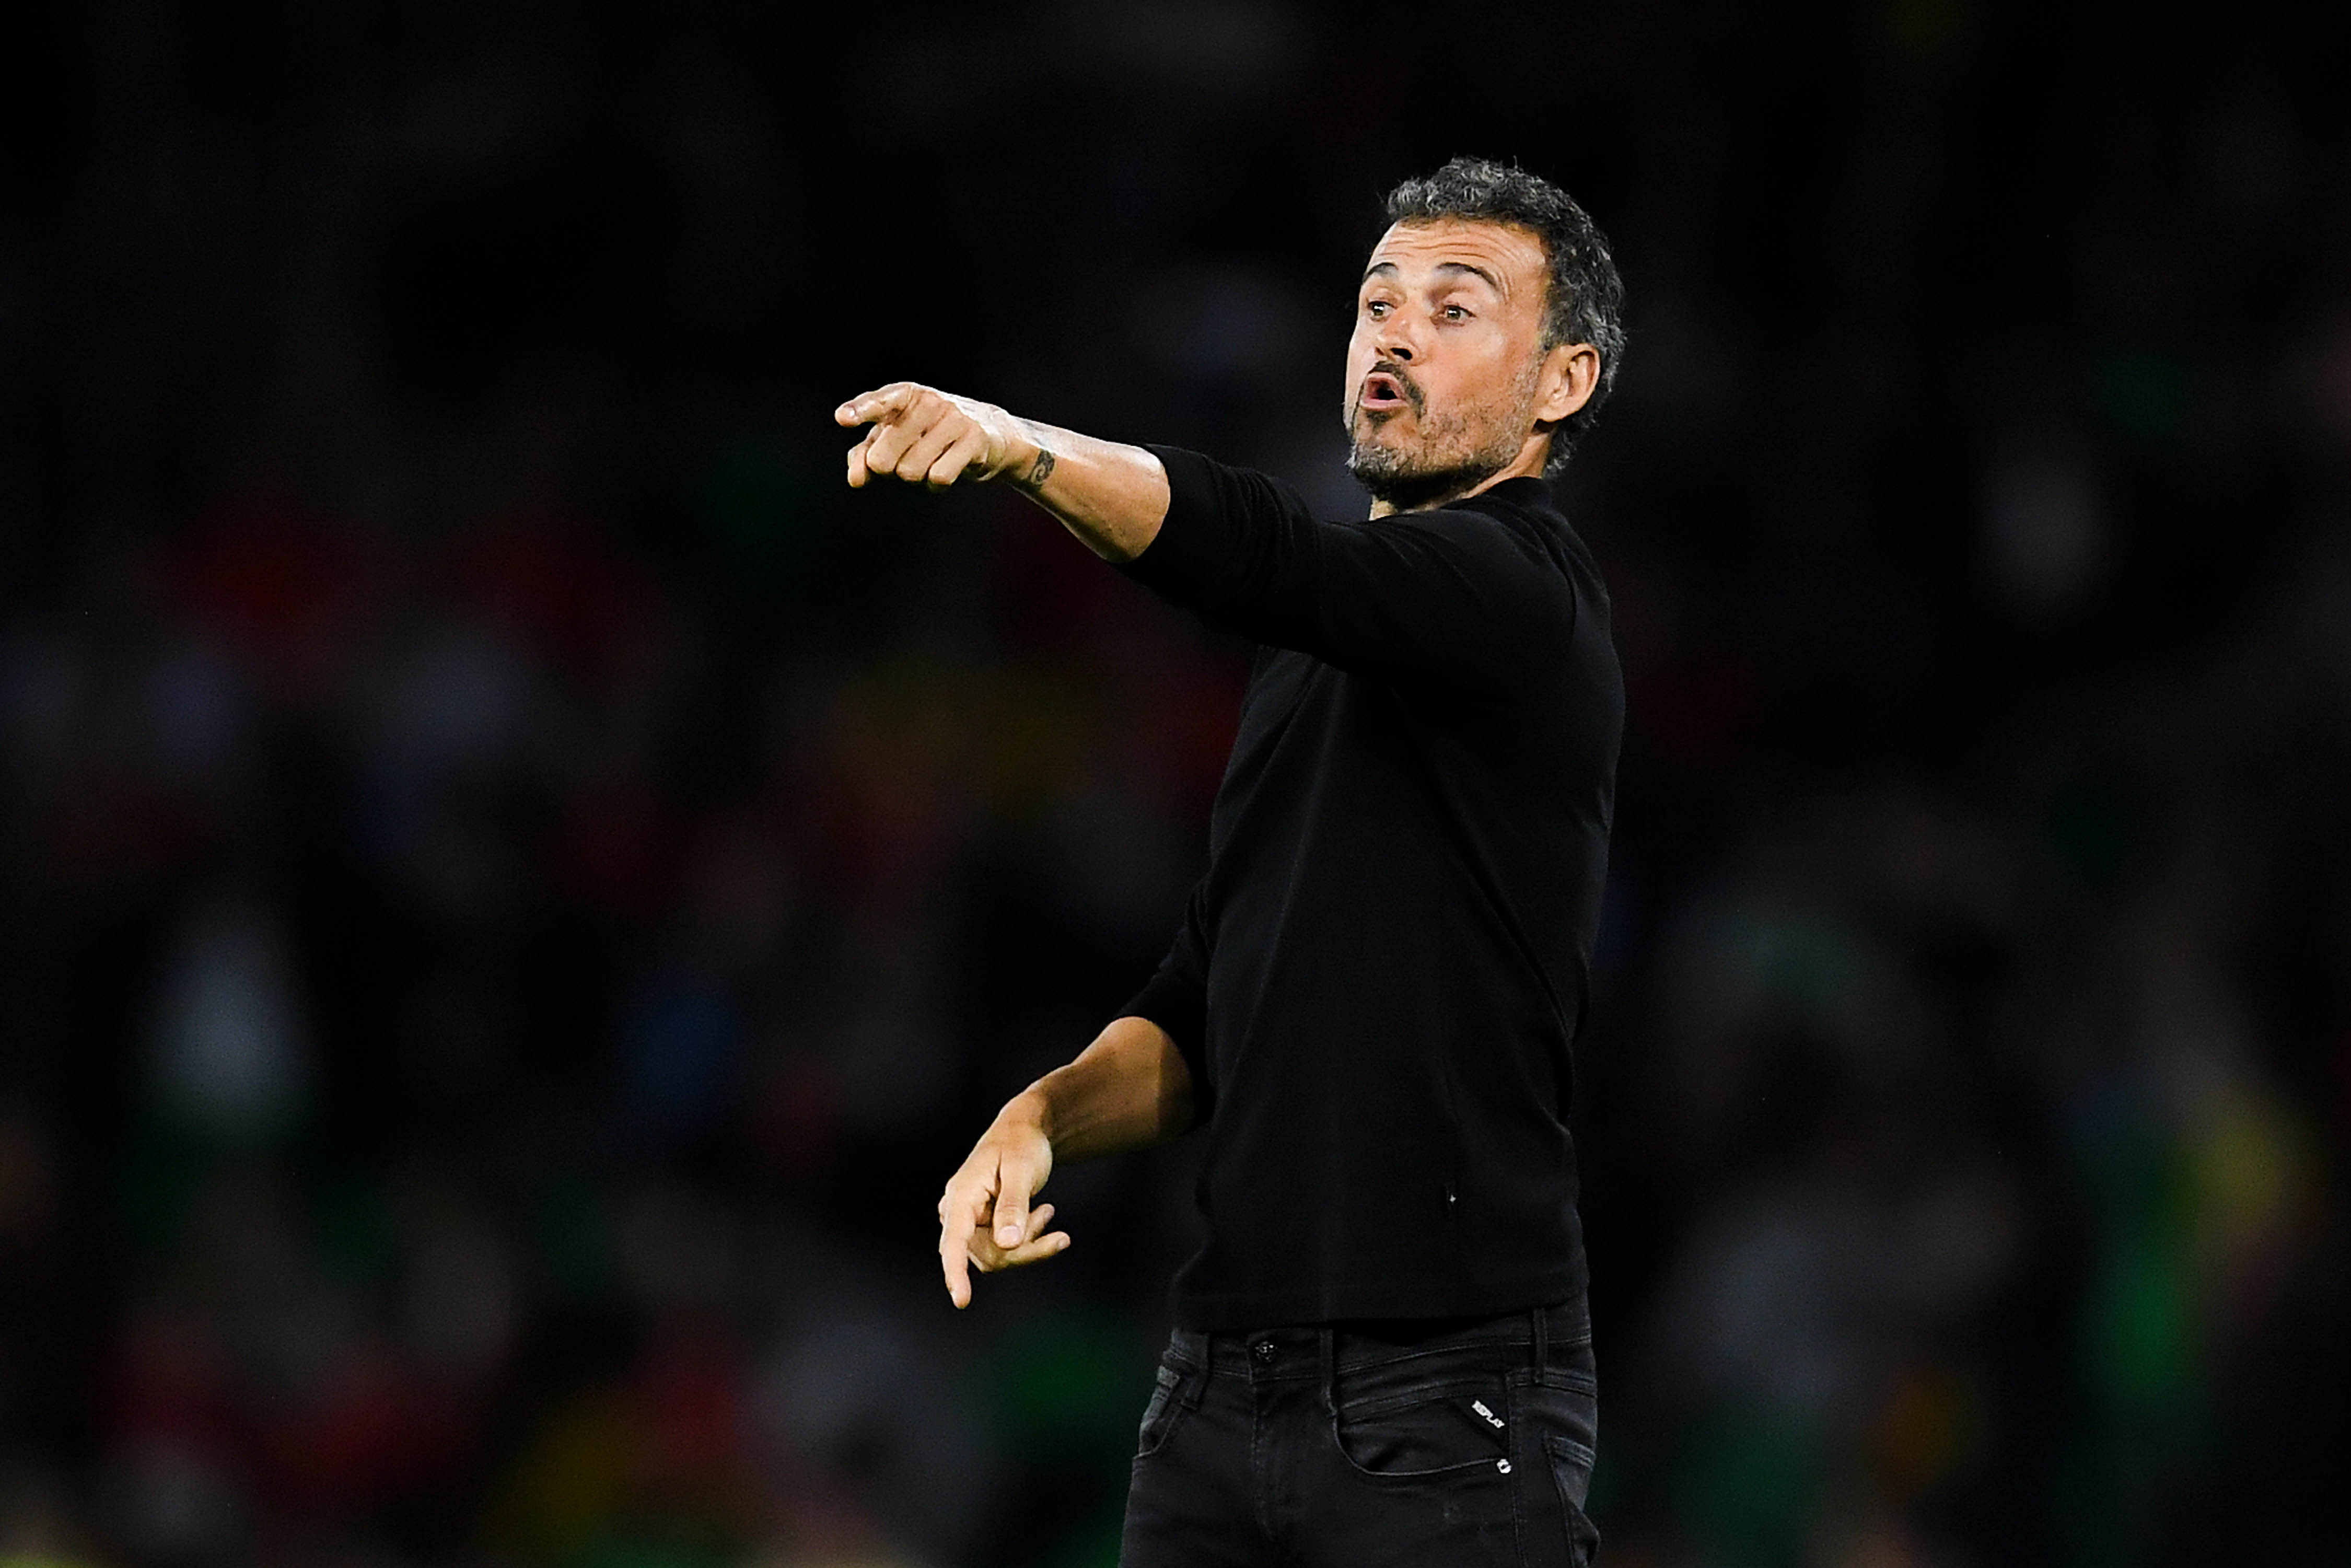 Can Luis Enrique bring back the glory days for Spain? (Photo by David Ramos/Getty Images)